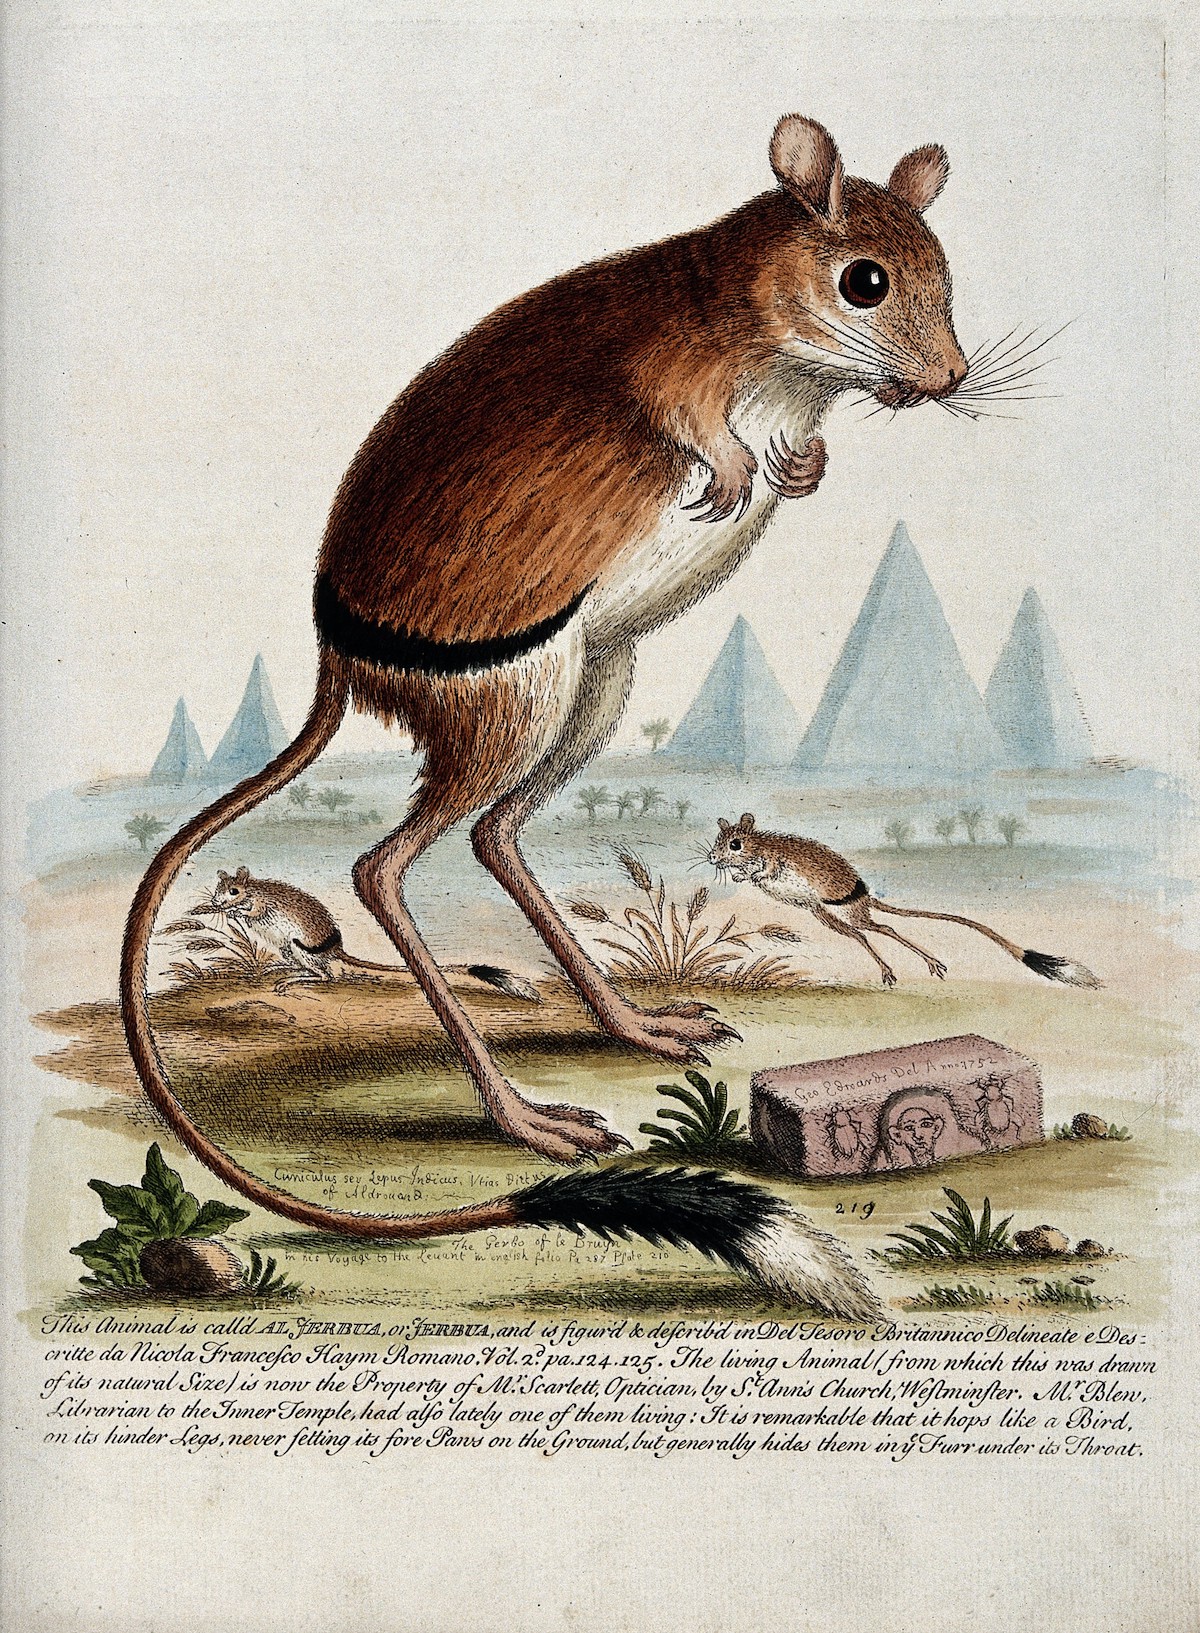 drawing of a jerboa, with pyramids in the background